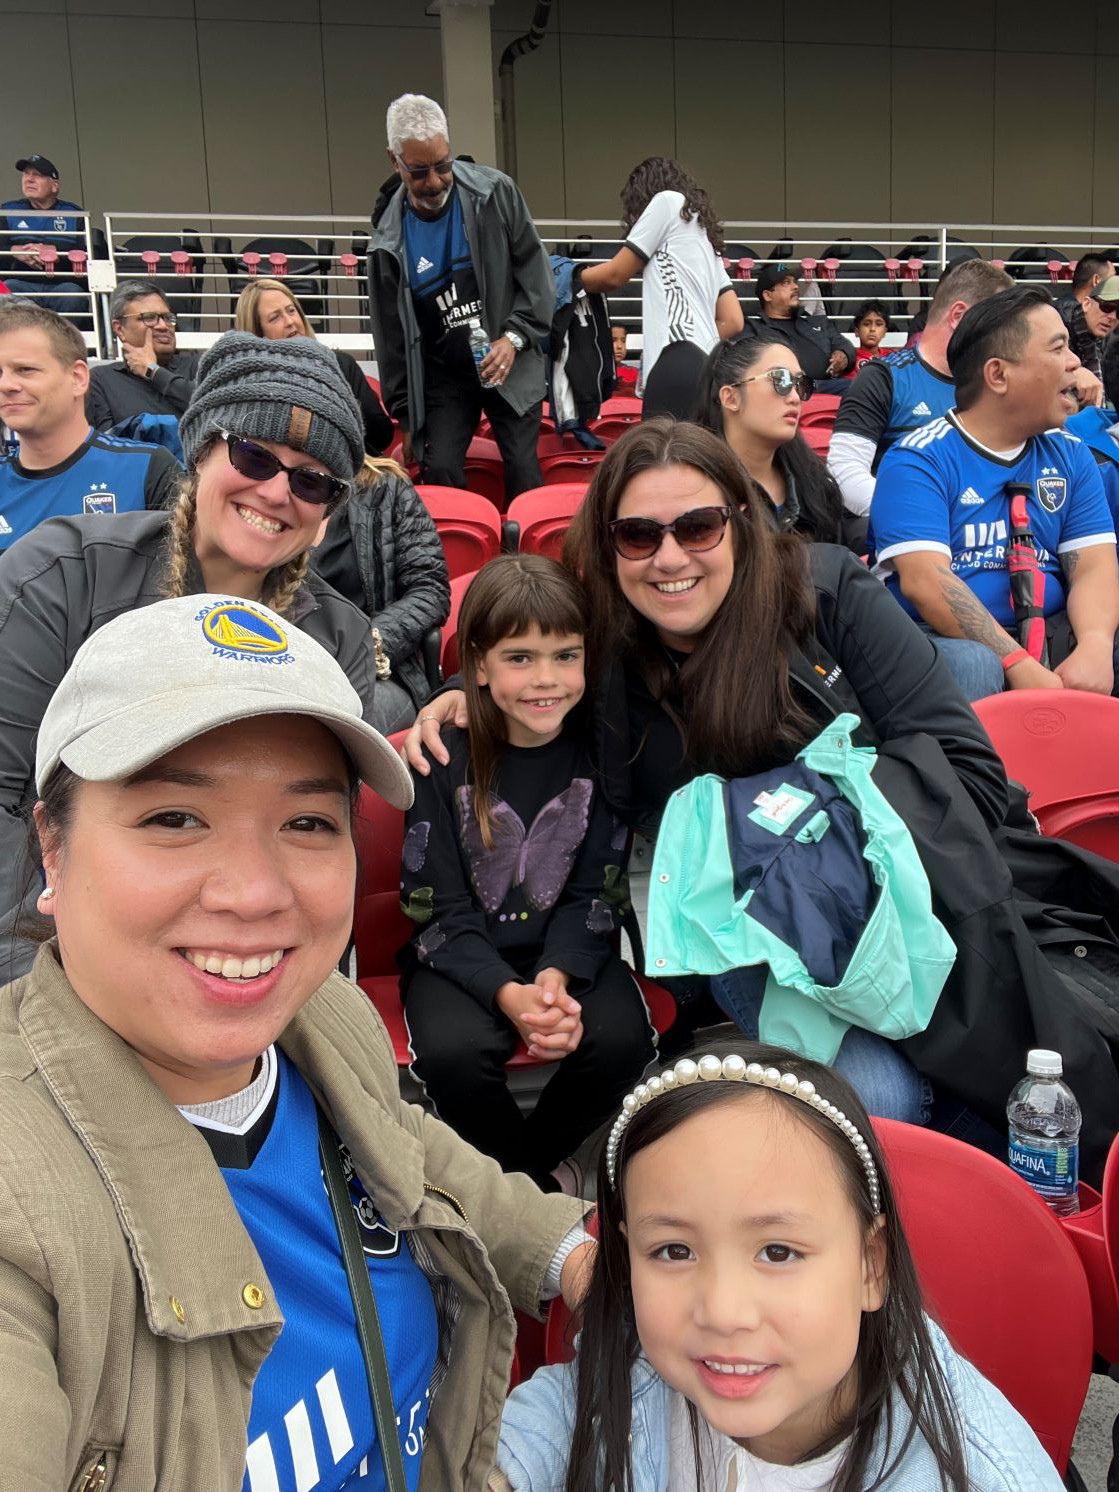 Intermedia friends & family attending an Earthquakes soccer game together. Such a fun day! 